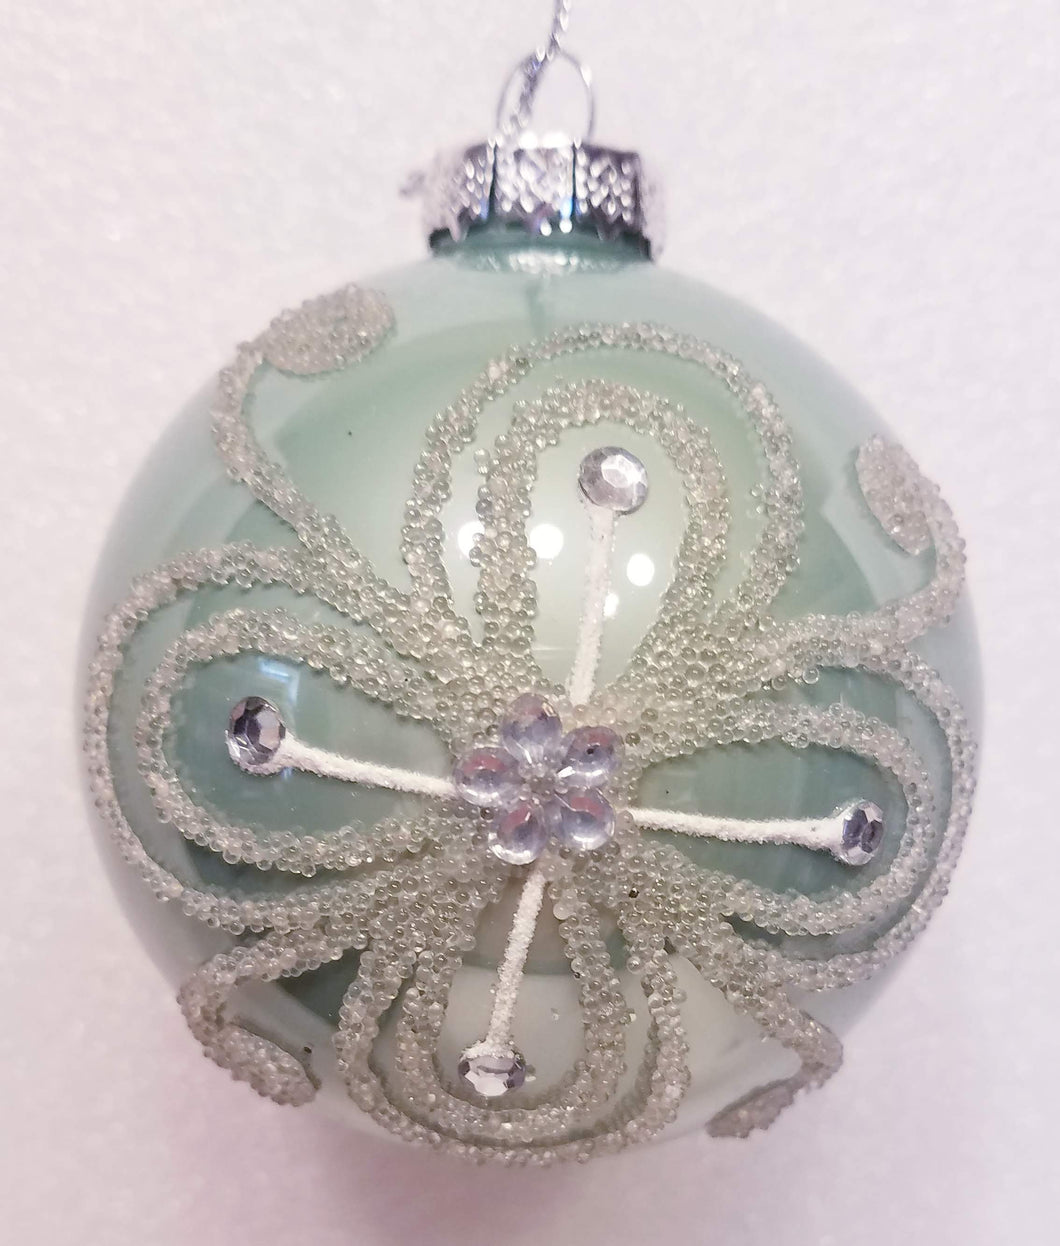 Glass Silver and Pale Aqua Embellished Glass Ball Ornaments